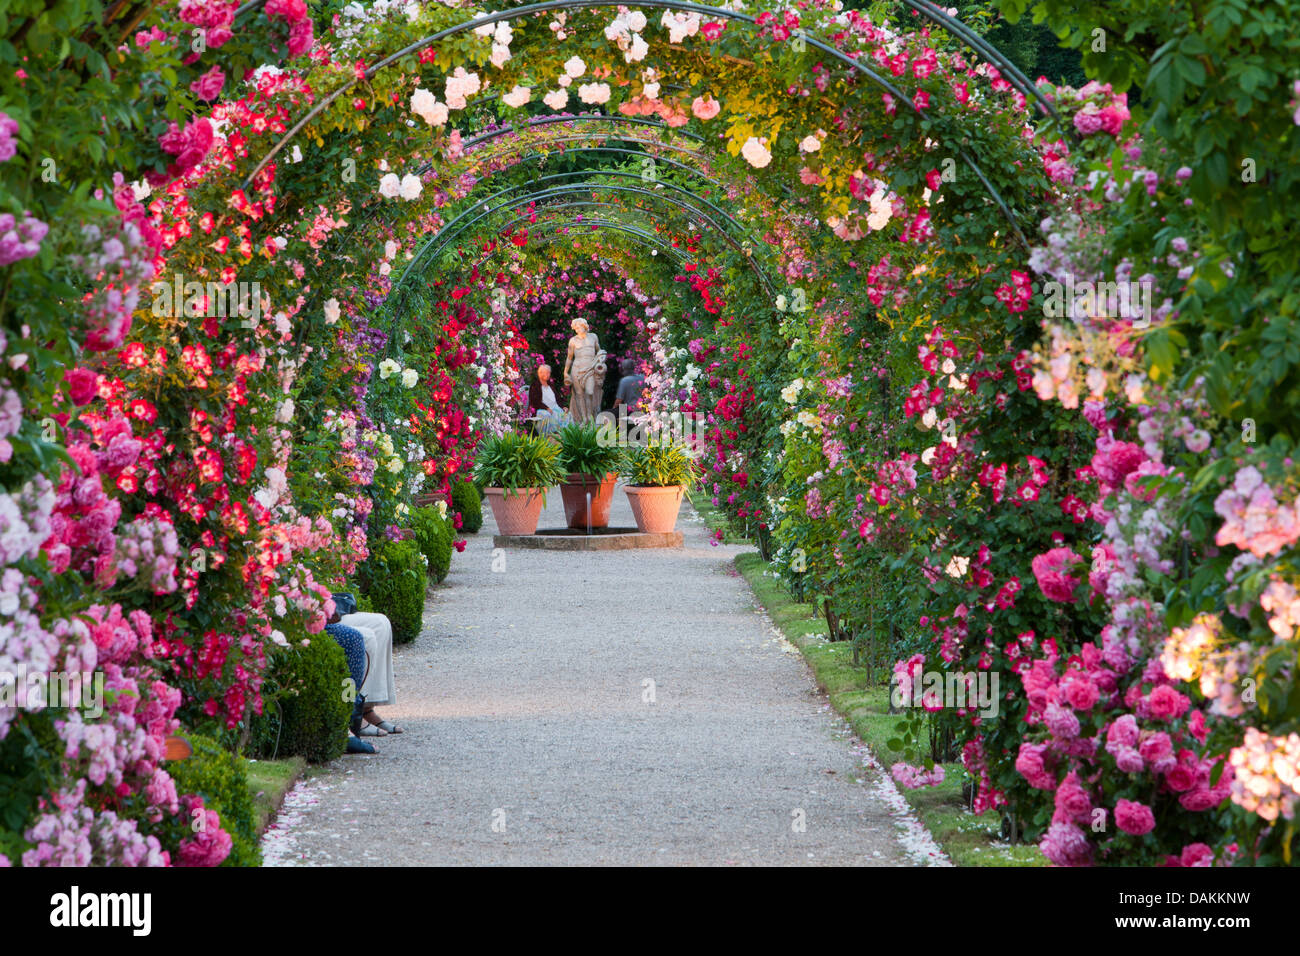 ornamental rose (Rosa spec.), illuminated path through rose arches in a blooming rose garden, Germany Stock Photo